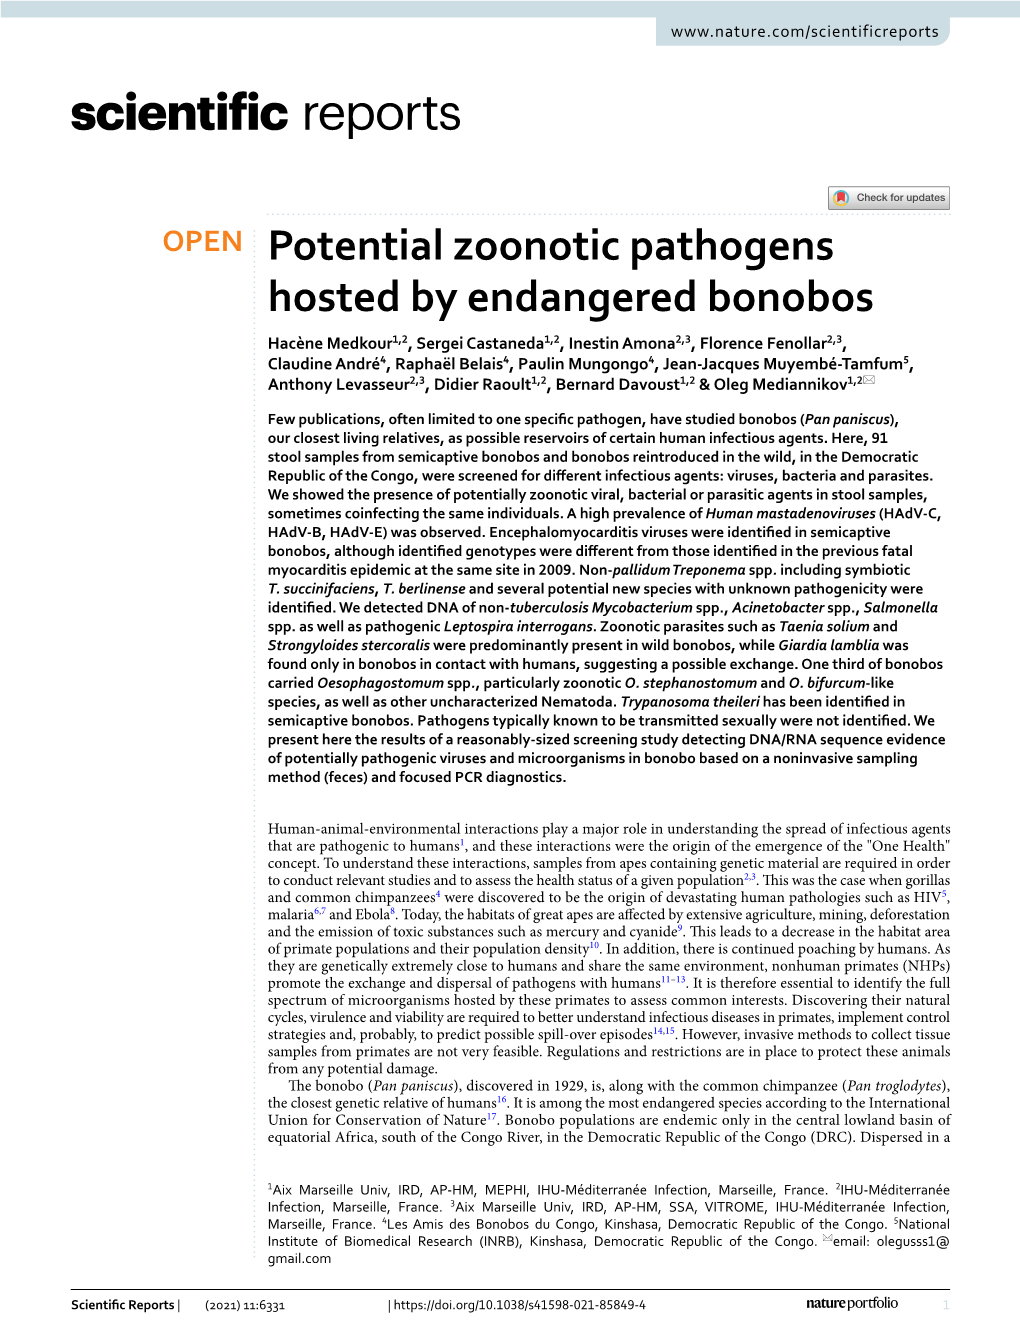 Potential Zoonotic Pathogens Hosted by Endangered Bonobos